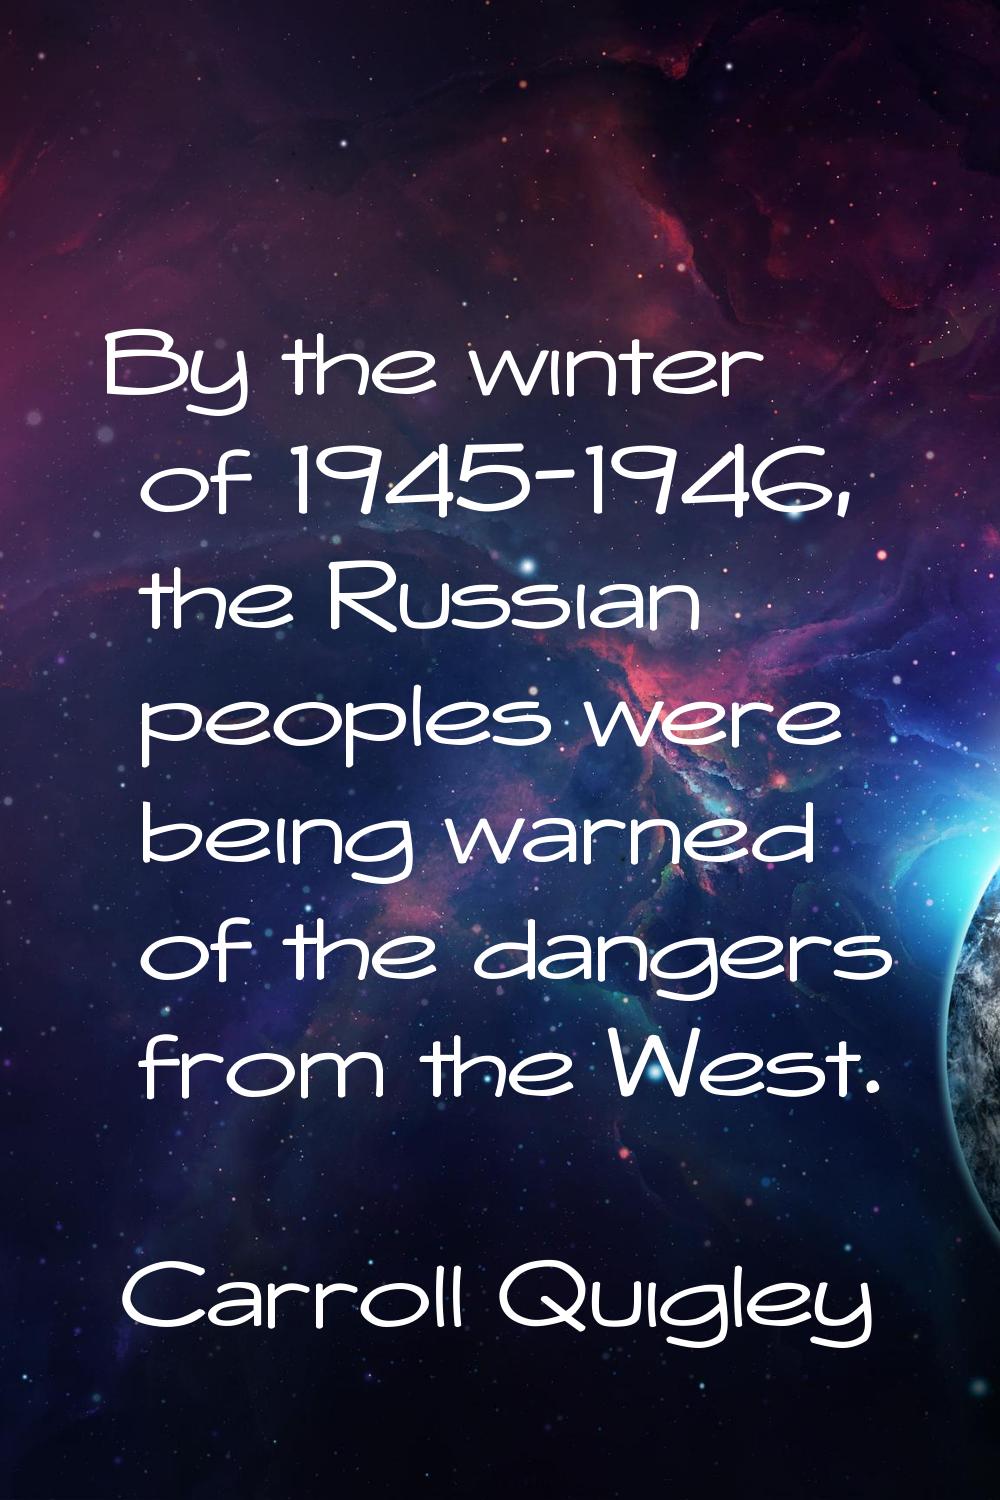 By the winter of 1945-1946, the Russian peoples were being warned of the dangers from the West.